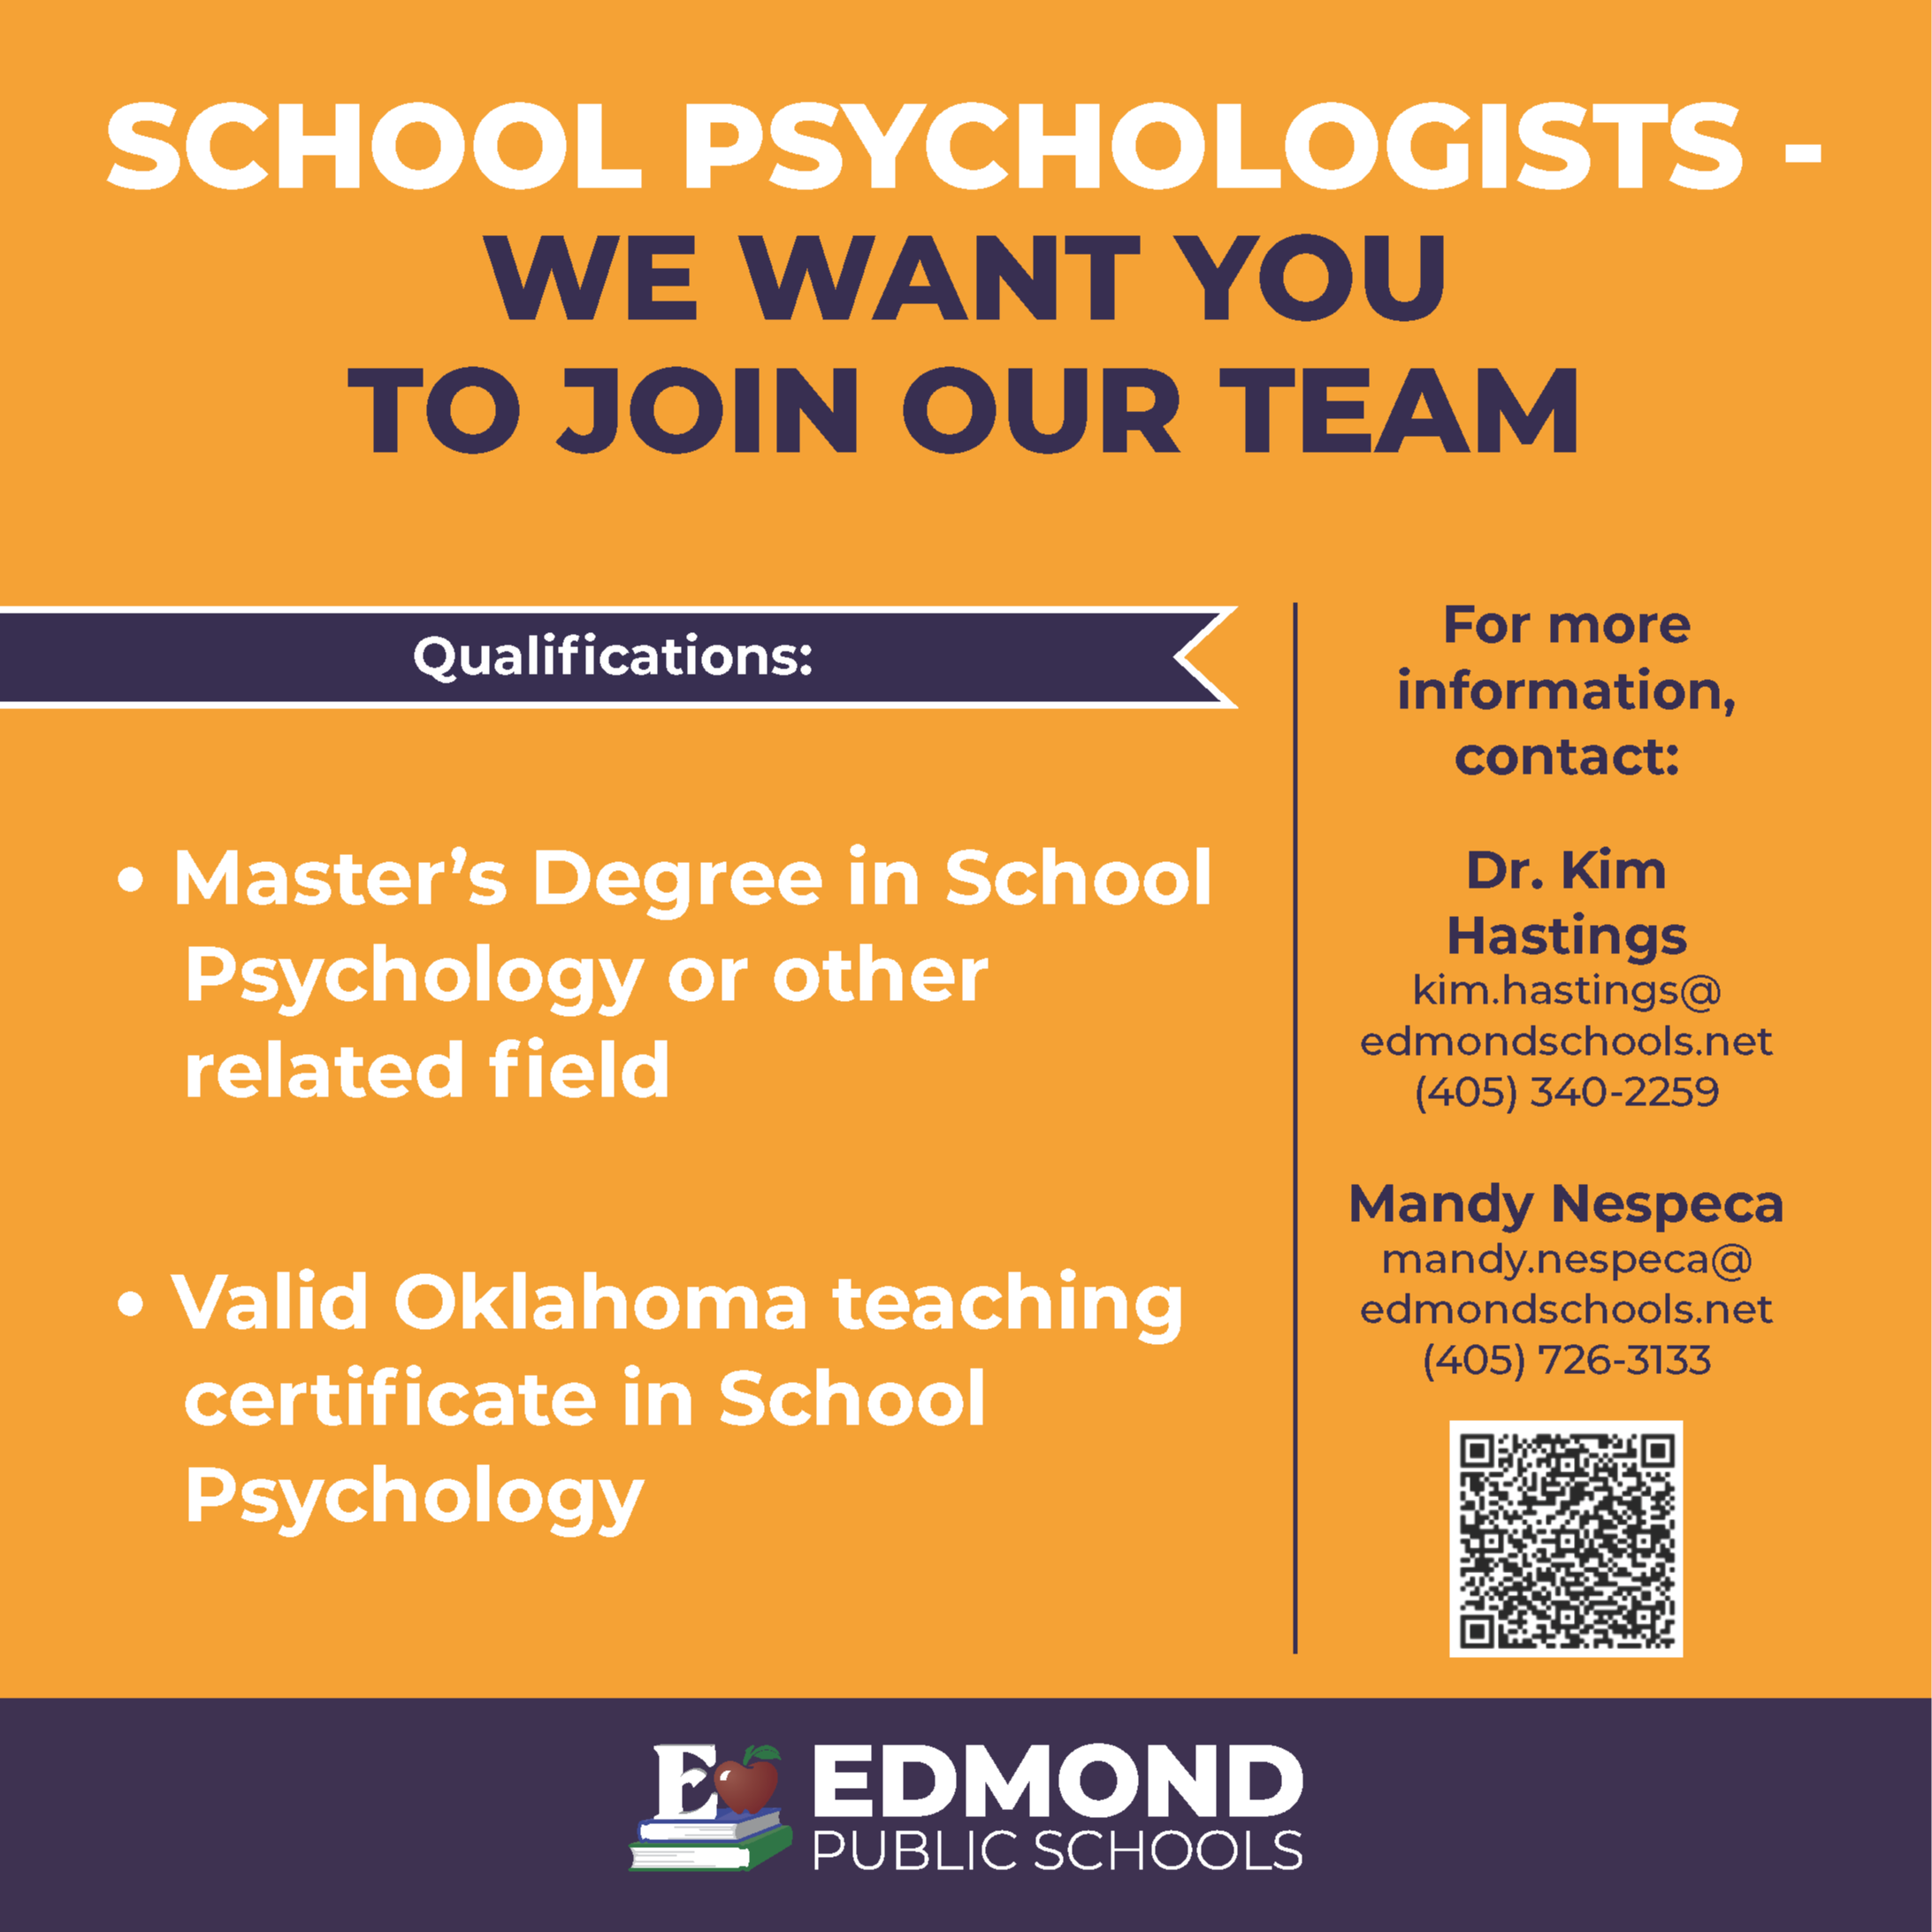 SCHOOL PSYCHOLOGISTS - WE WANT YOU TO JOIN OUR TEAM • Master’s Degree in School Psychology or other related field • Valid Oklahoma teaching certificate in School Psychology Kim Hastings, kim.hastings@Mandy Nespeca, mandy.nespeca@For more For more information, contact: Dr. Kim Hastings kim.hastings@ edmondschools.net (405) 340-2259 Mandy Nespeca mandy.nespeca@ edmondschools.net (405) 726-3133